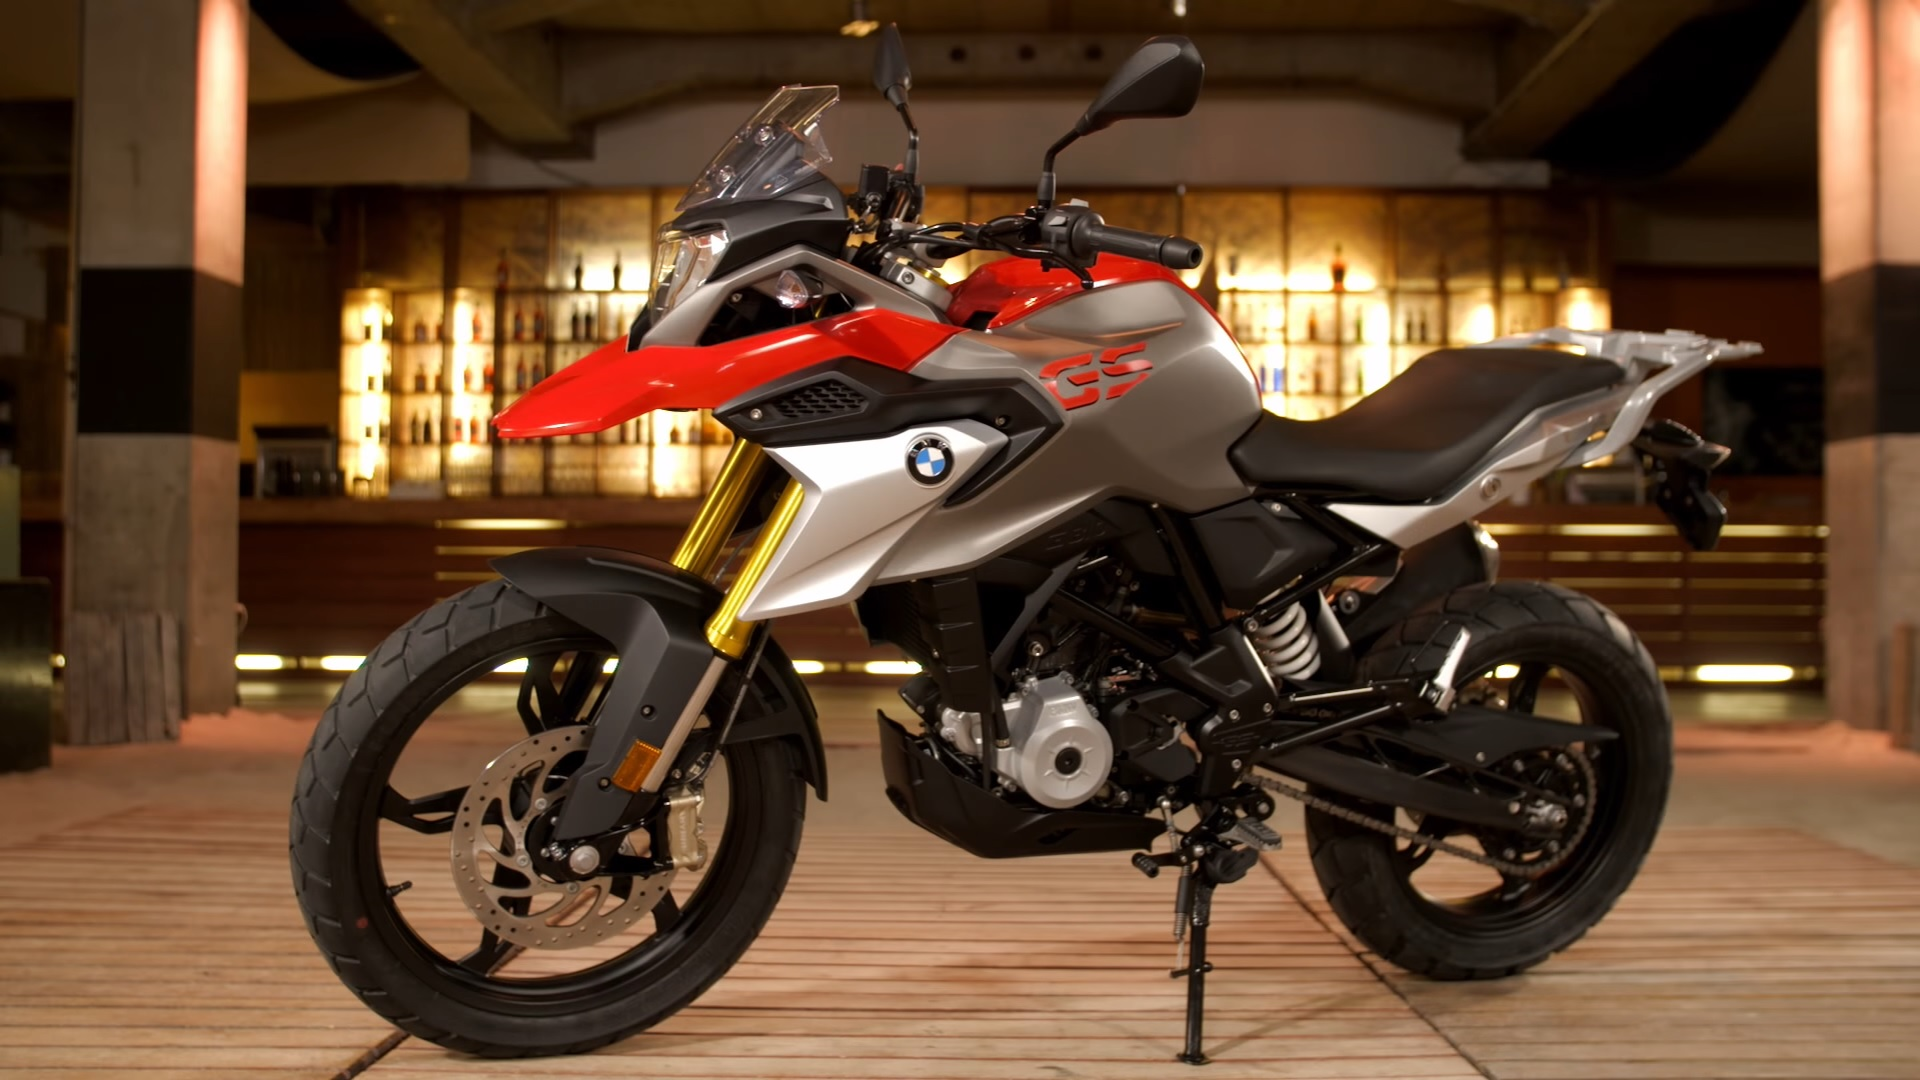 The New BMW G 310 GS Revealed